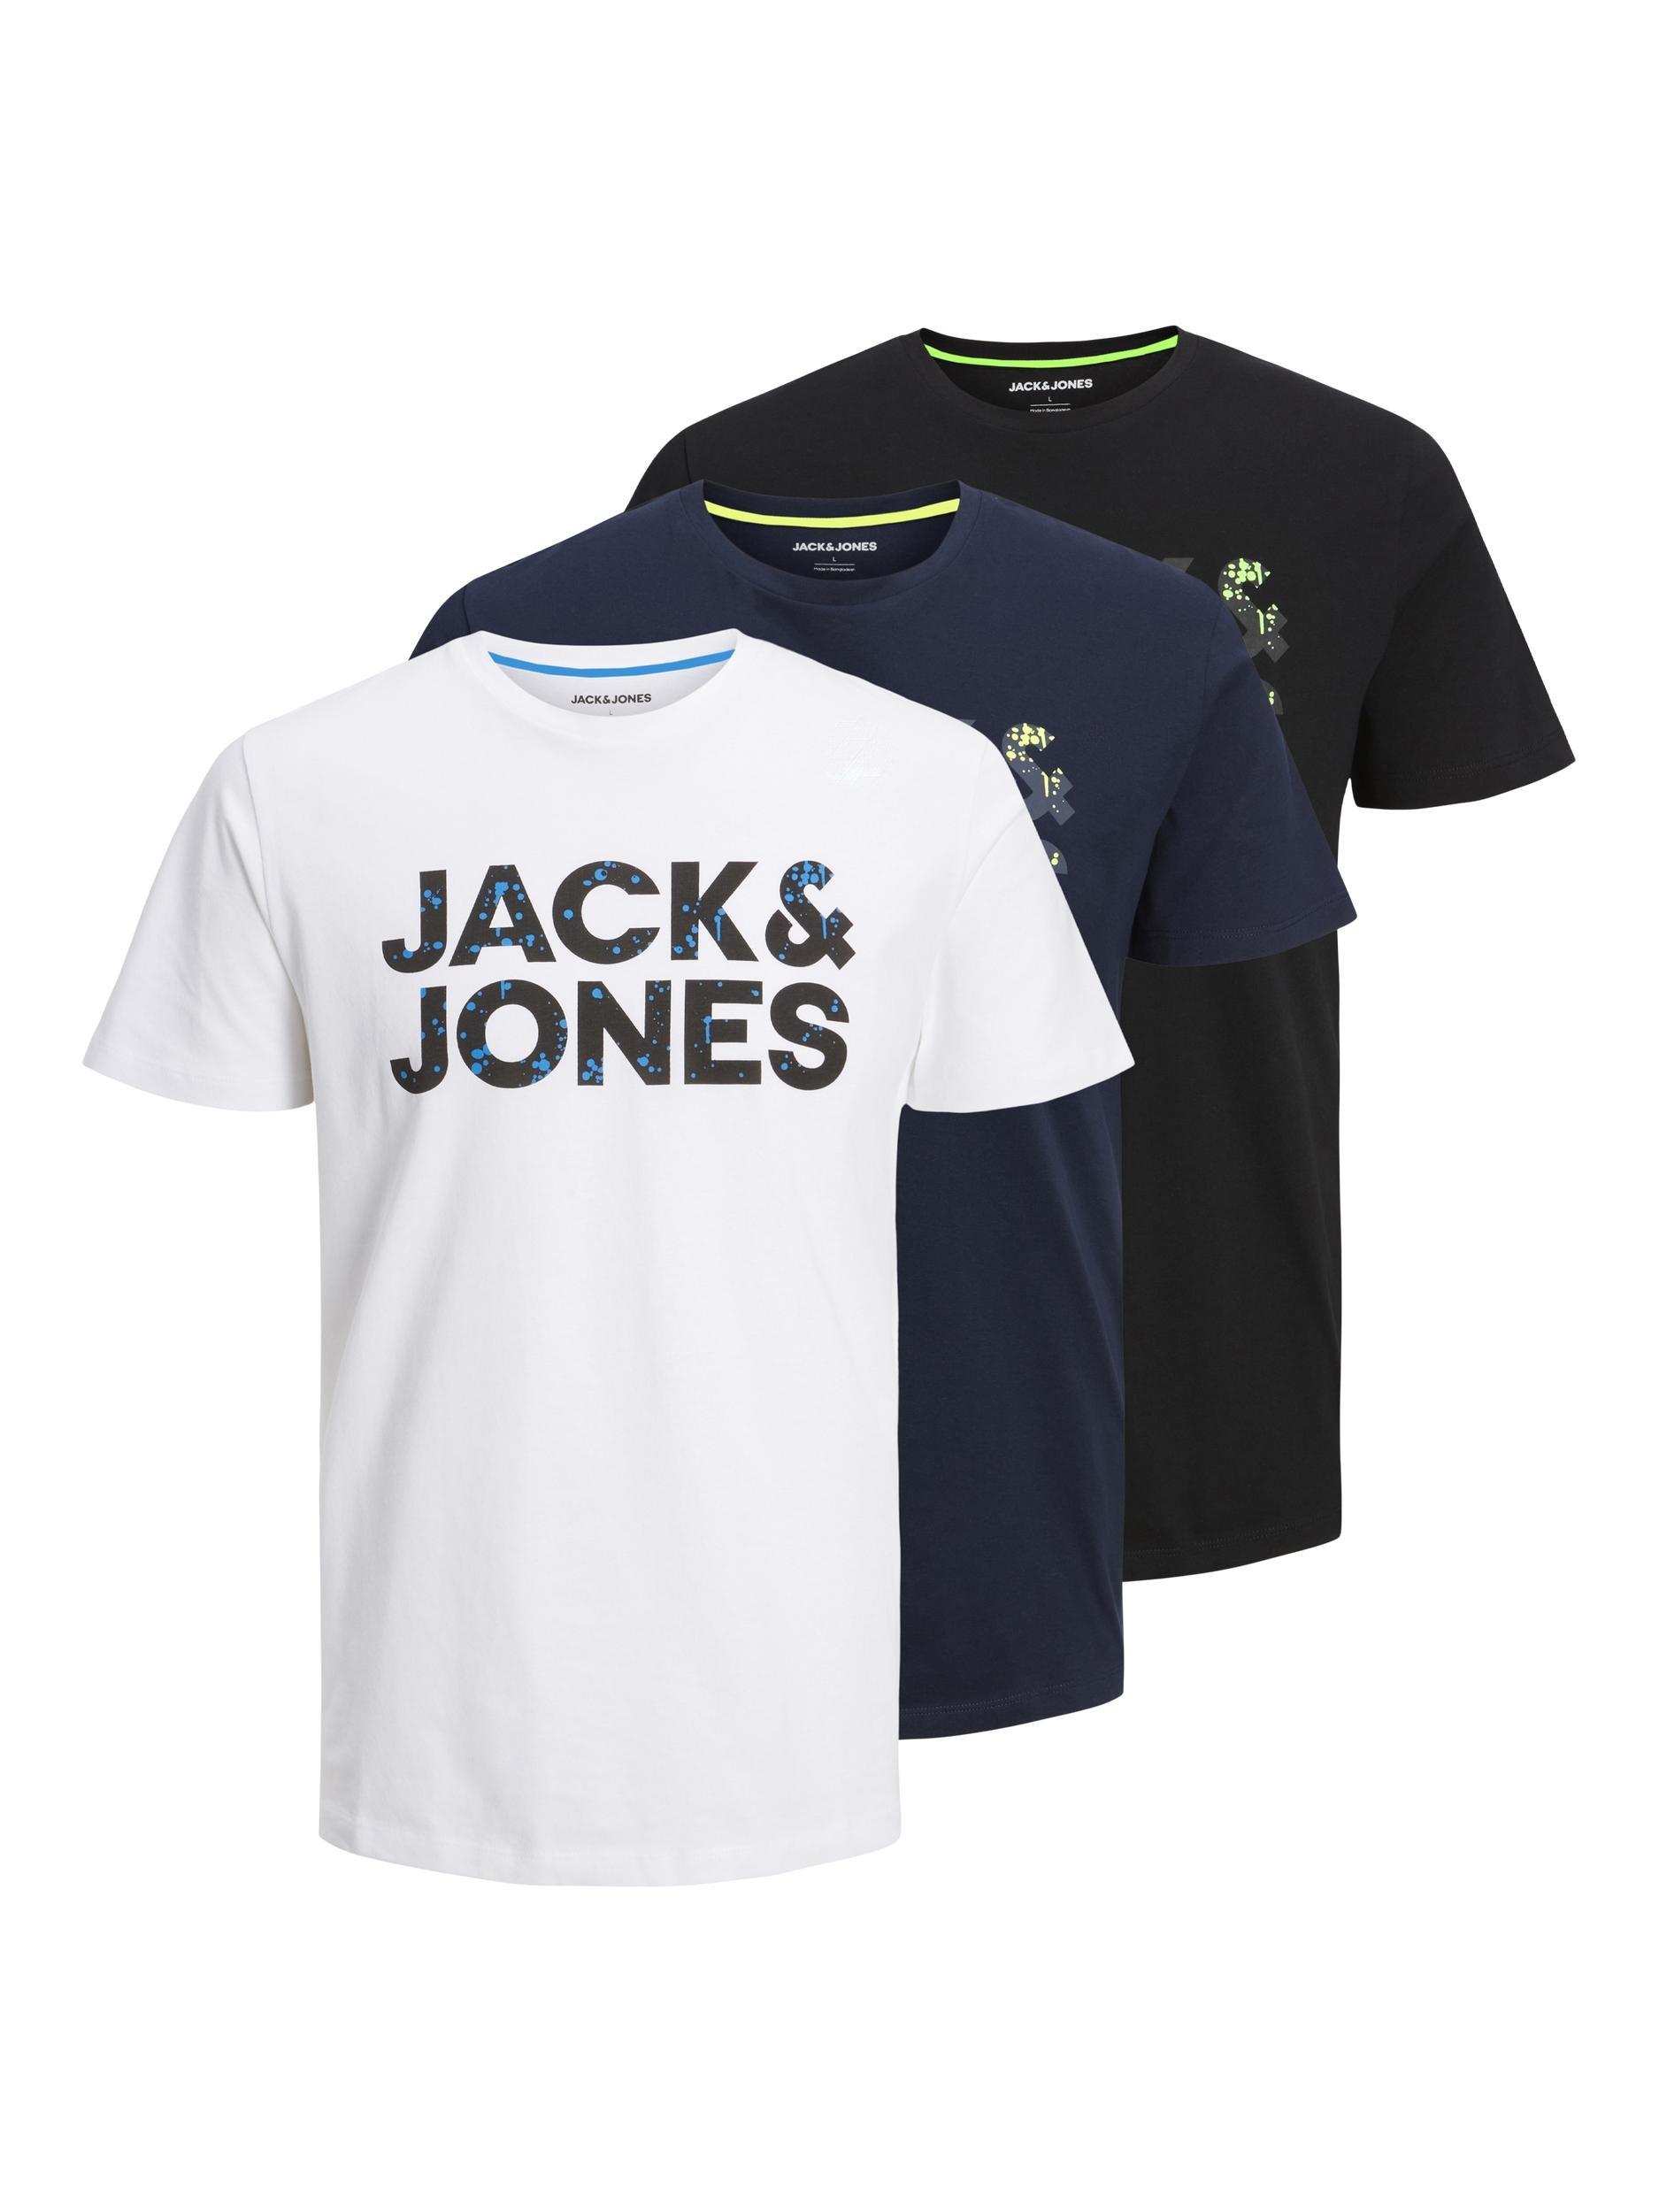 boys jack and jones pack of 3 t-shirts - multi - size: 8 years - plain